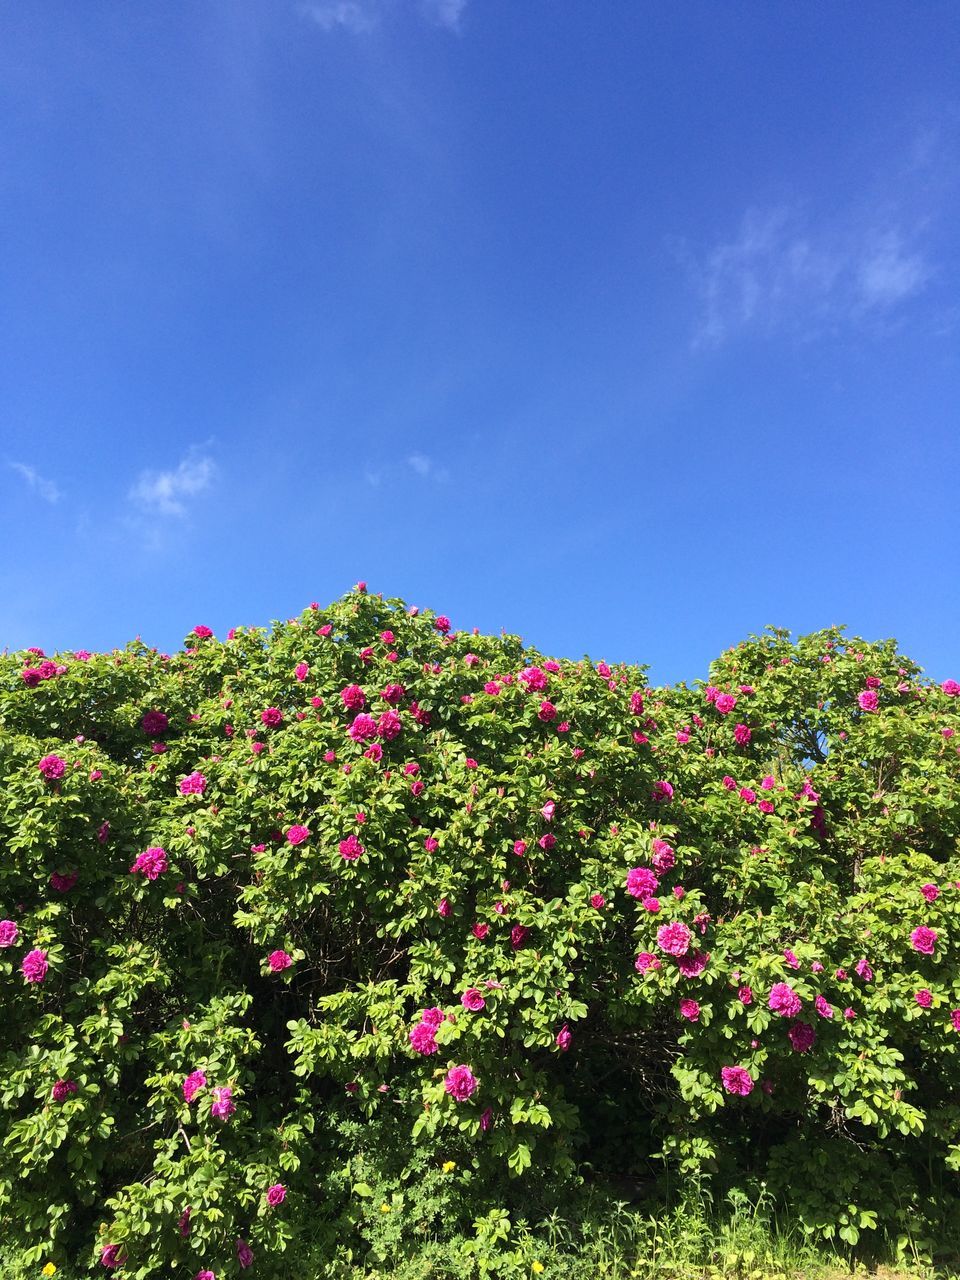 flower, growth, low angle view, tree, freshness, beauty in nature, sky, nature, blue, fragility, blooming, plant, sunlight, in bloom, day, blossom, green color, pink color, no people, leaf